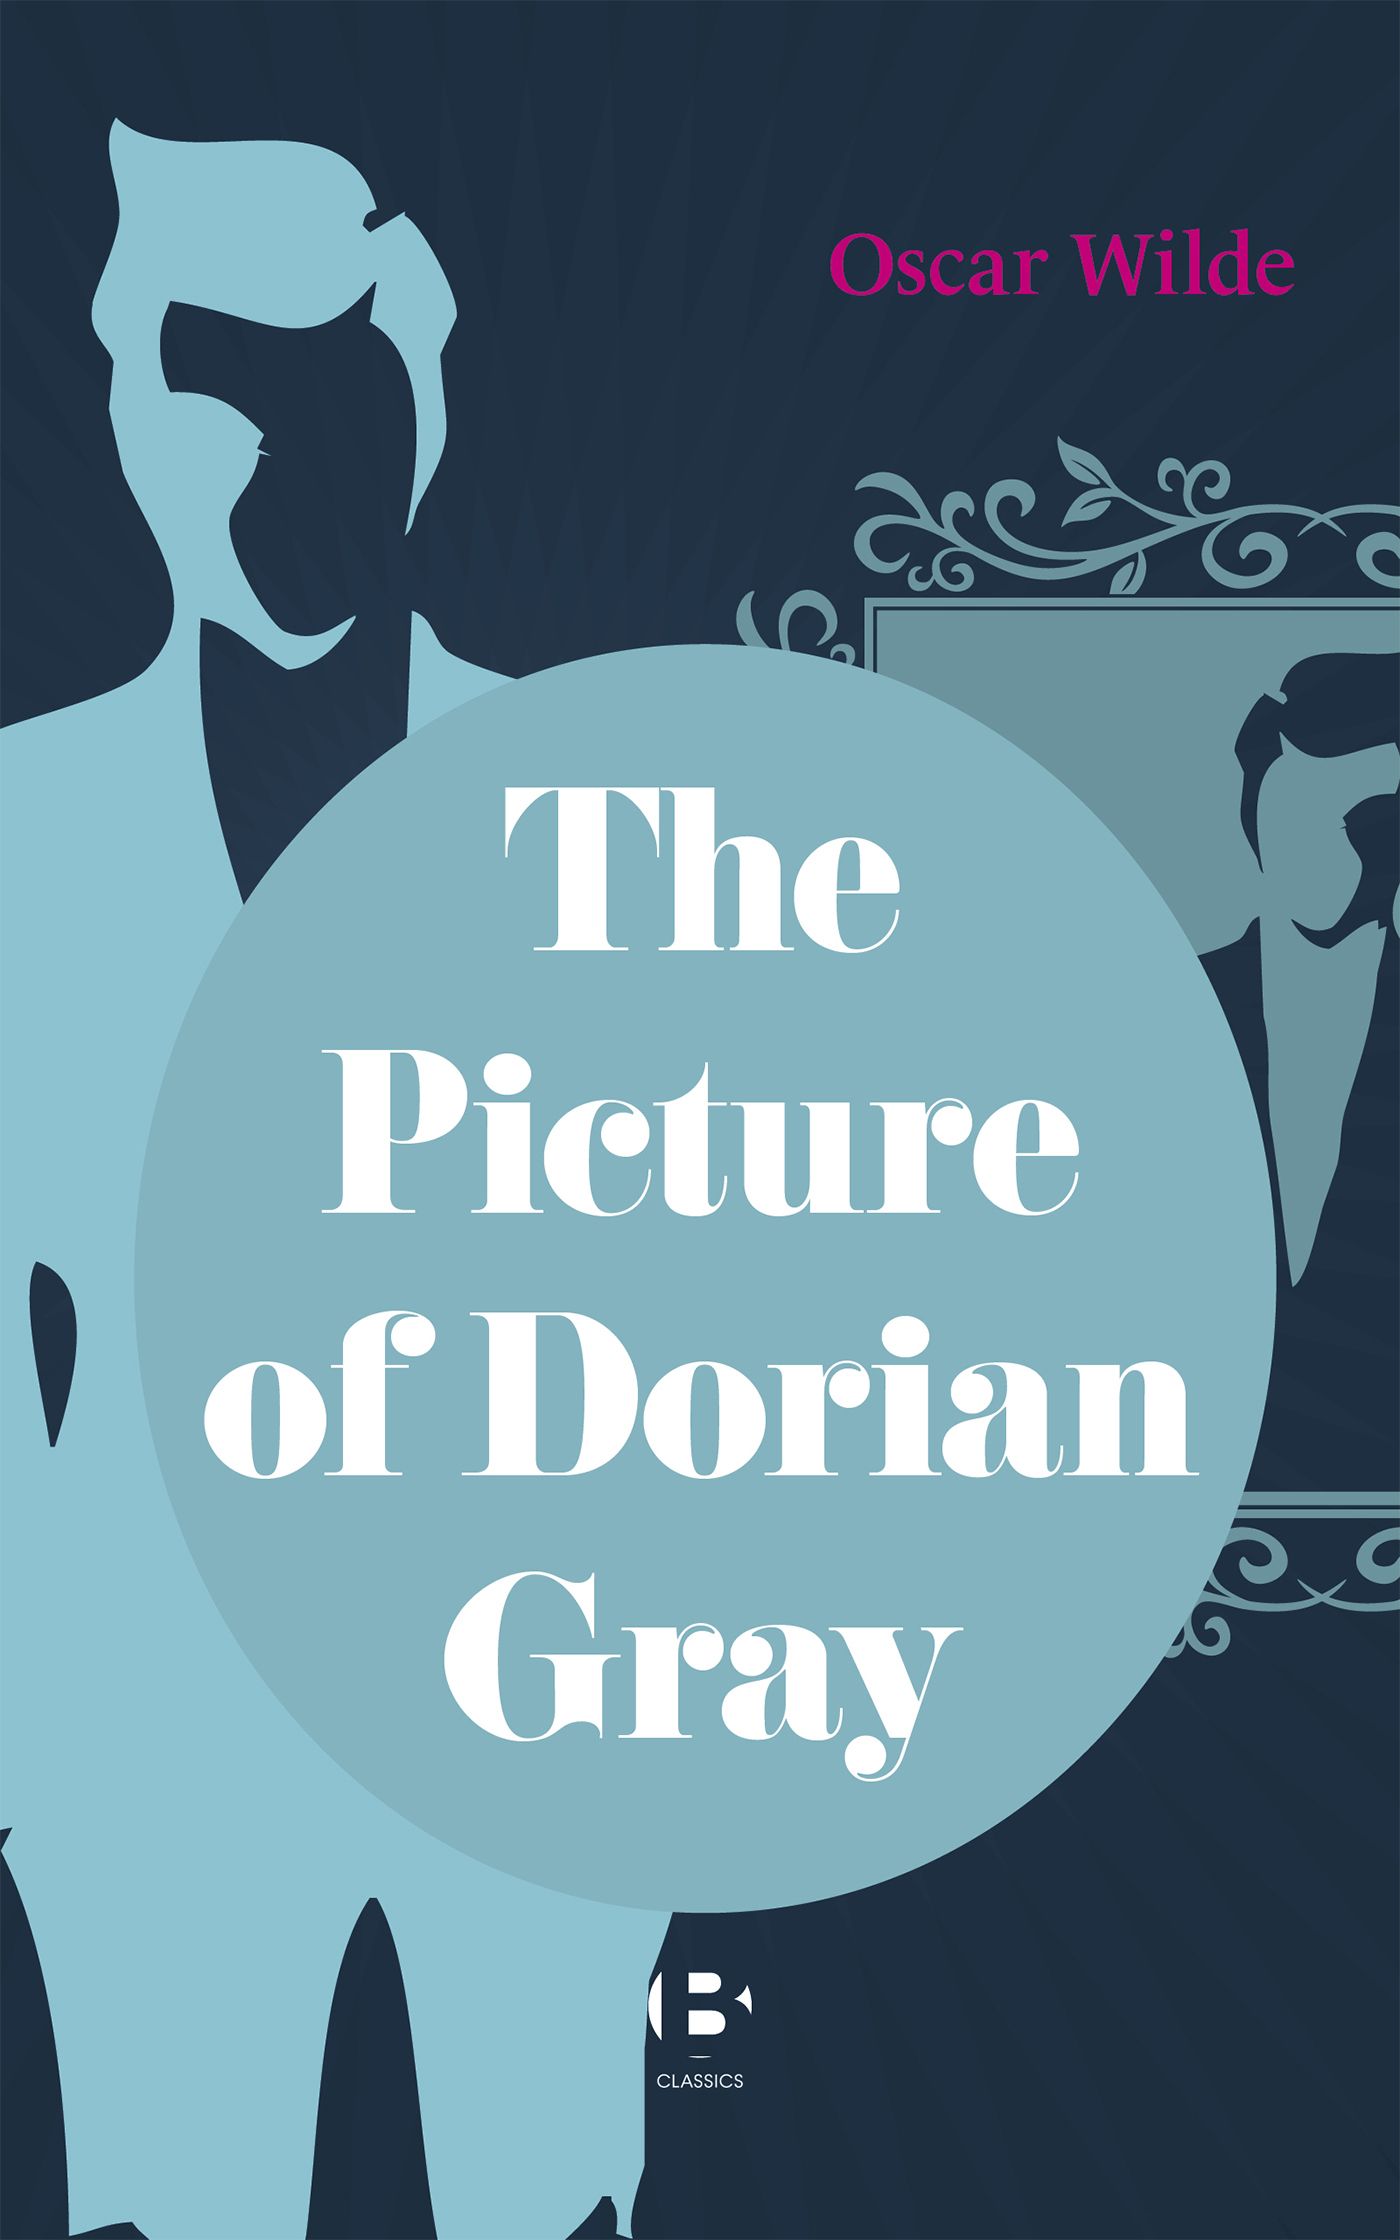 The Picture of Dorian Gray, eBook by Oscar Wilde